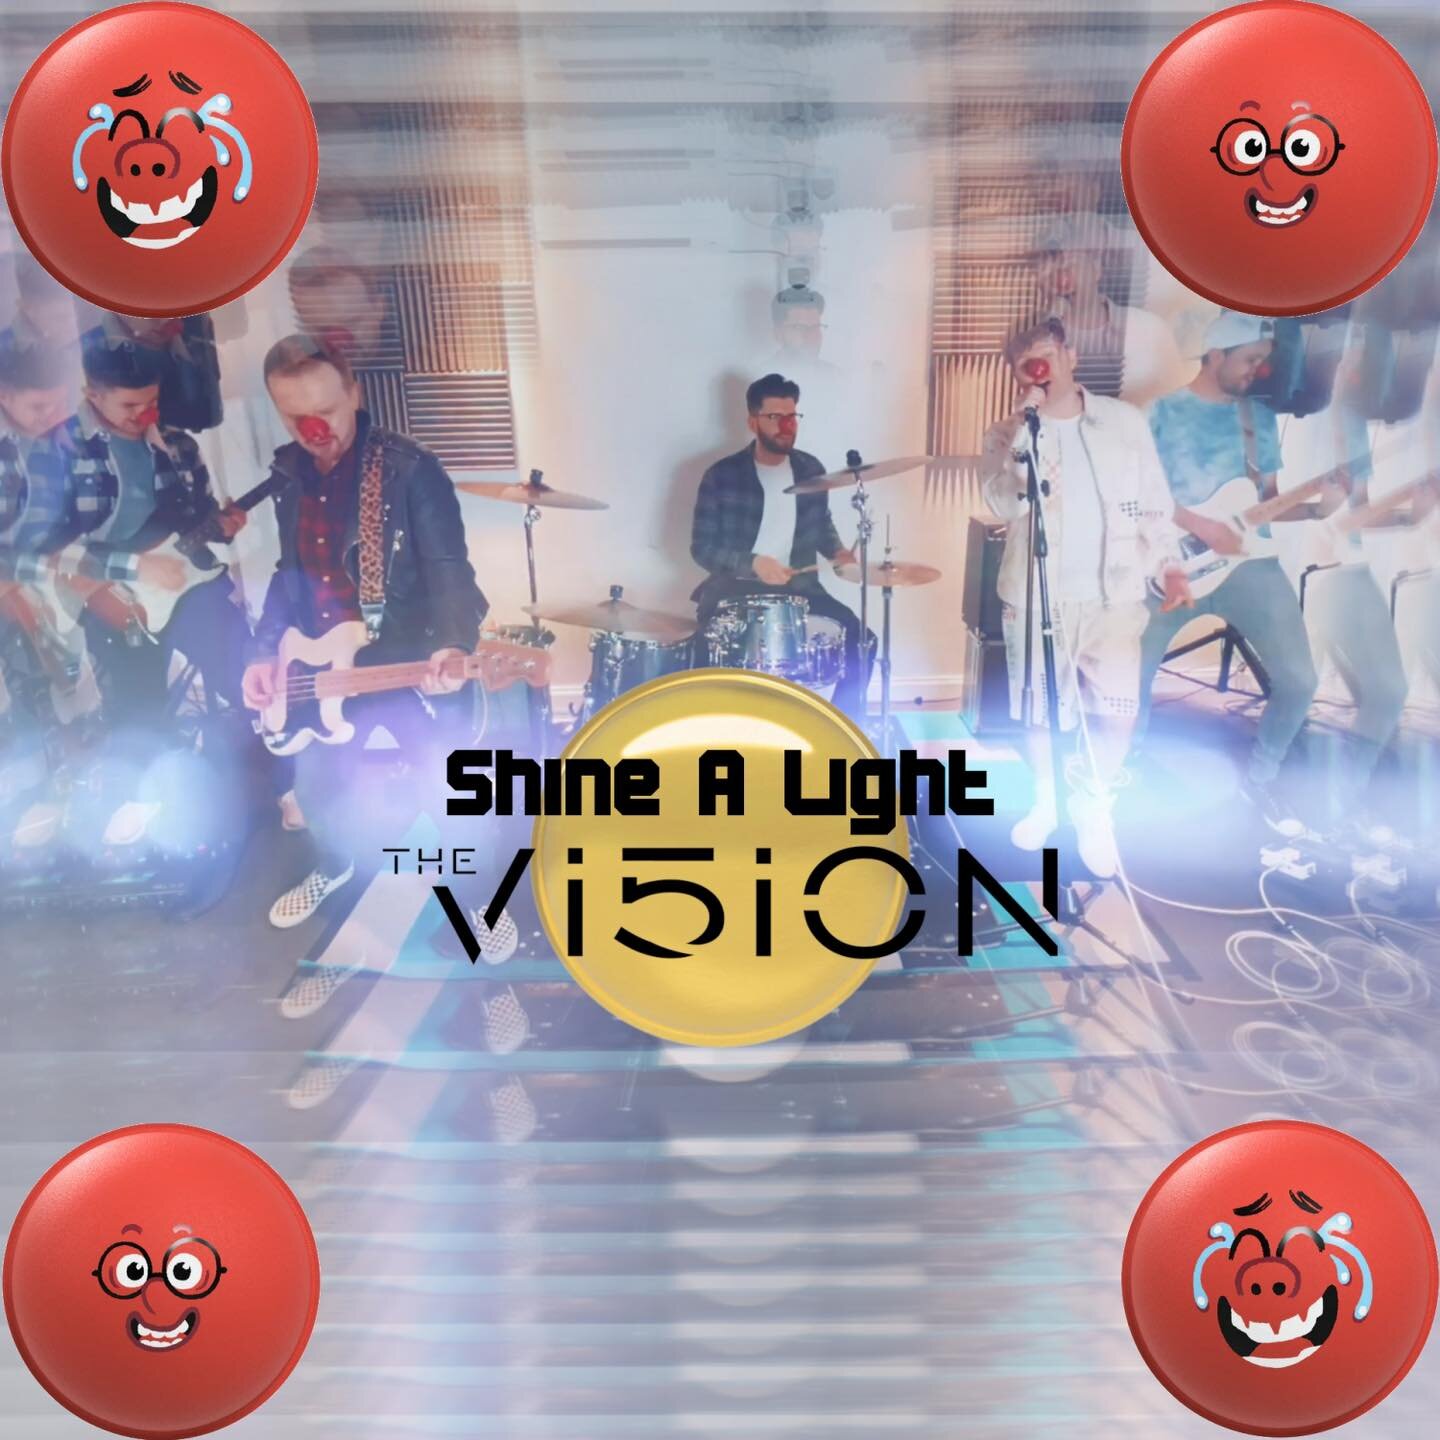 Red Nose Day is tomorrow, and guess what drops at MIDNIGHT TONIGHT!! That&rsquo;s right, Shine a Light will be available for streaming,  just in time for Comic Relief! Please share &amp; stream it and donate whatever you can in support of Comic Relie